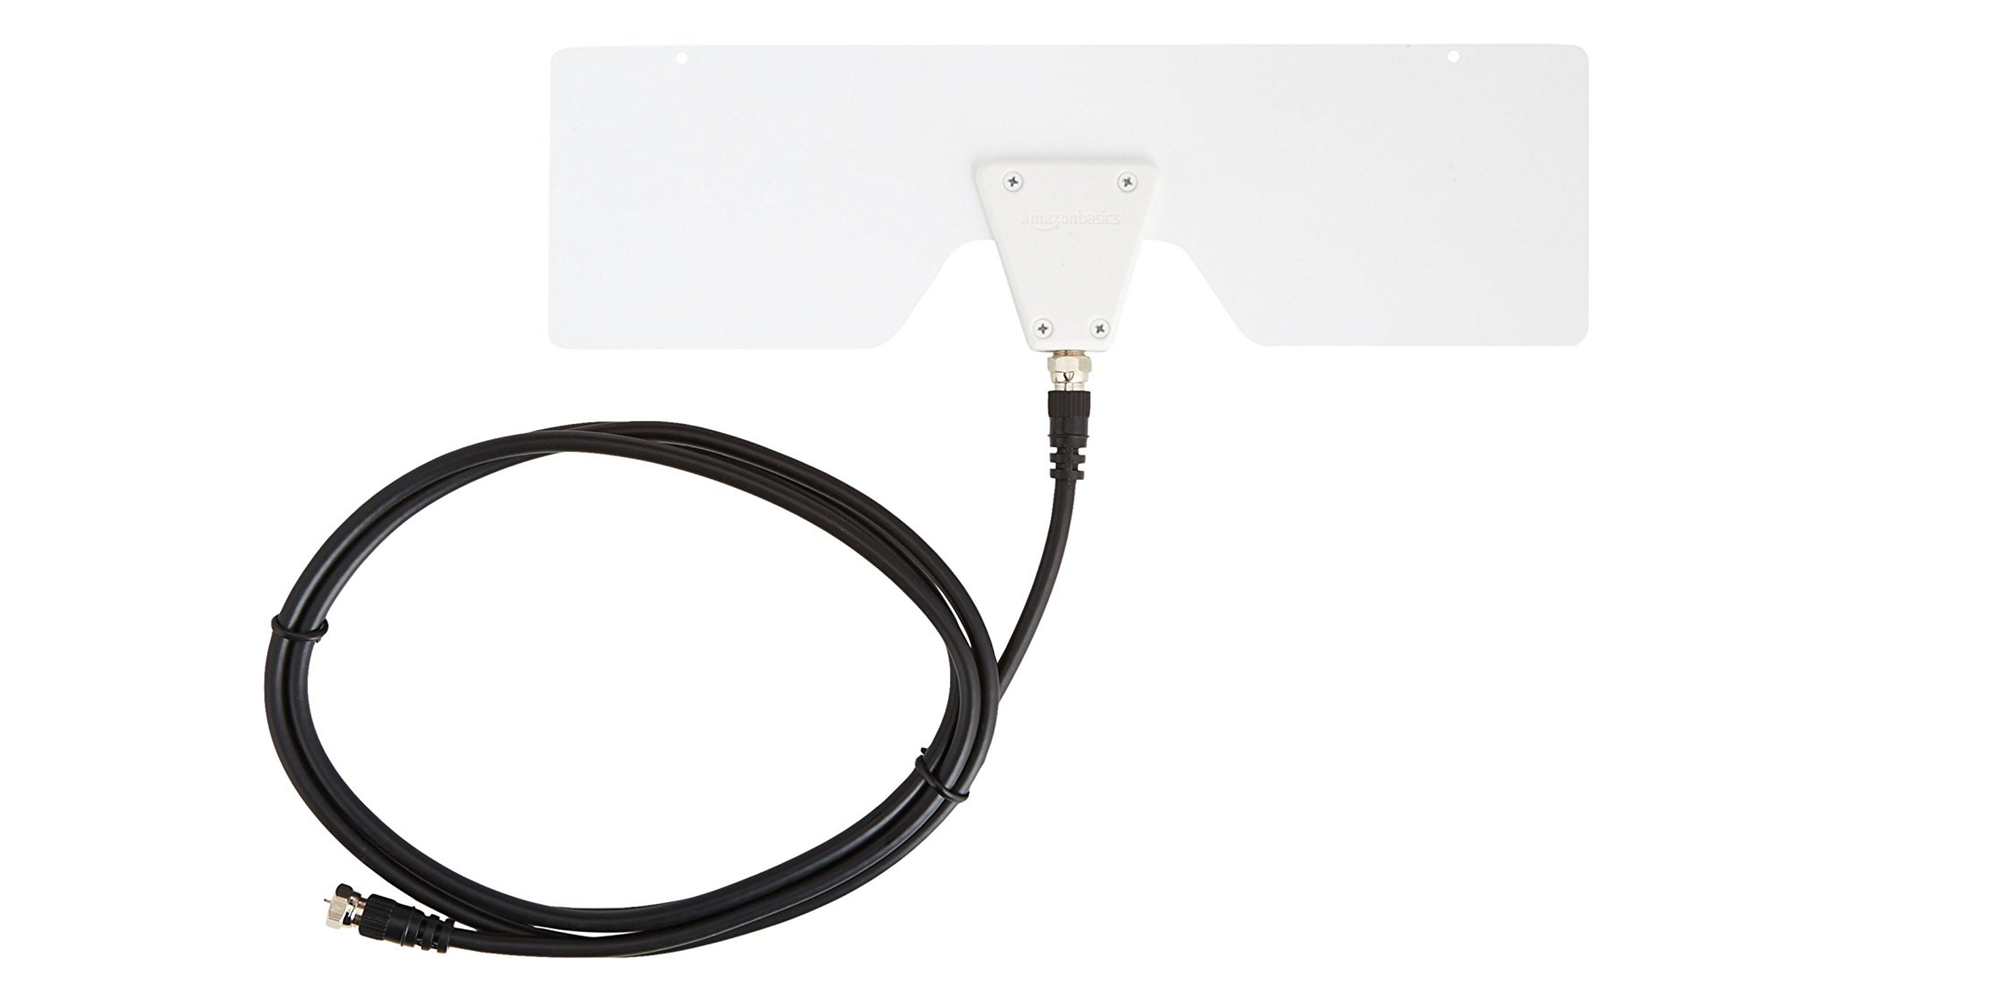 AmazonBasics 25-mile OTA Antenna brings Free HD content to your TV for ...